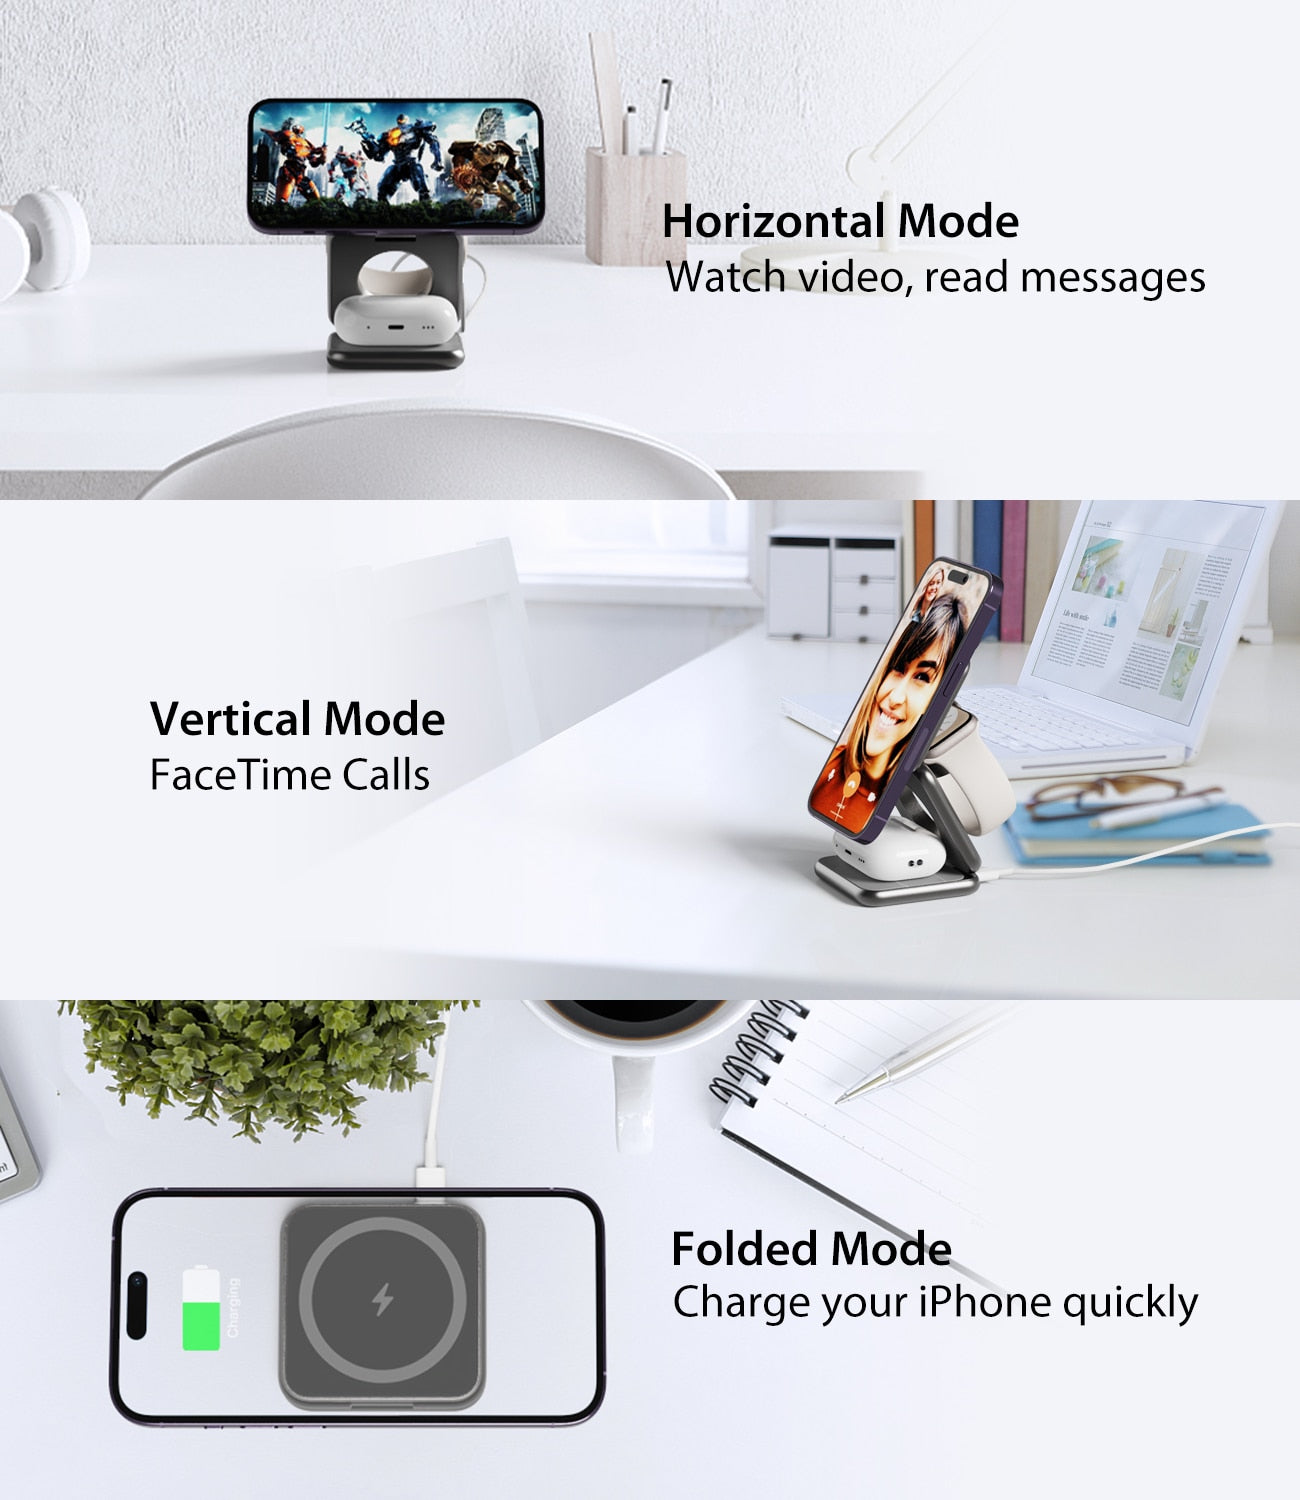 3 In 1 Foldable Magnetic Wireless Charger Stand For iPhone 14 13 12 Pro/Max/Plus, AirPods 3/2/Pro, iWatch Charging Station